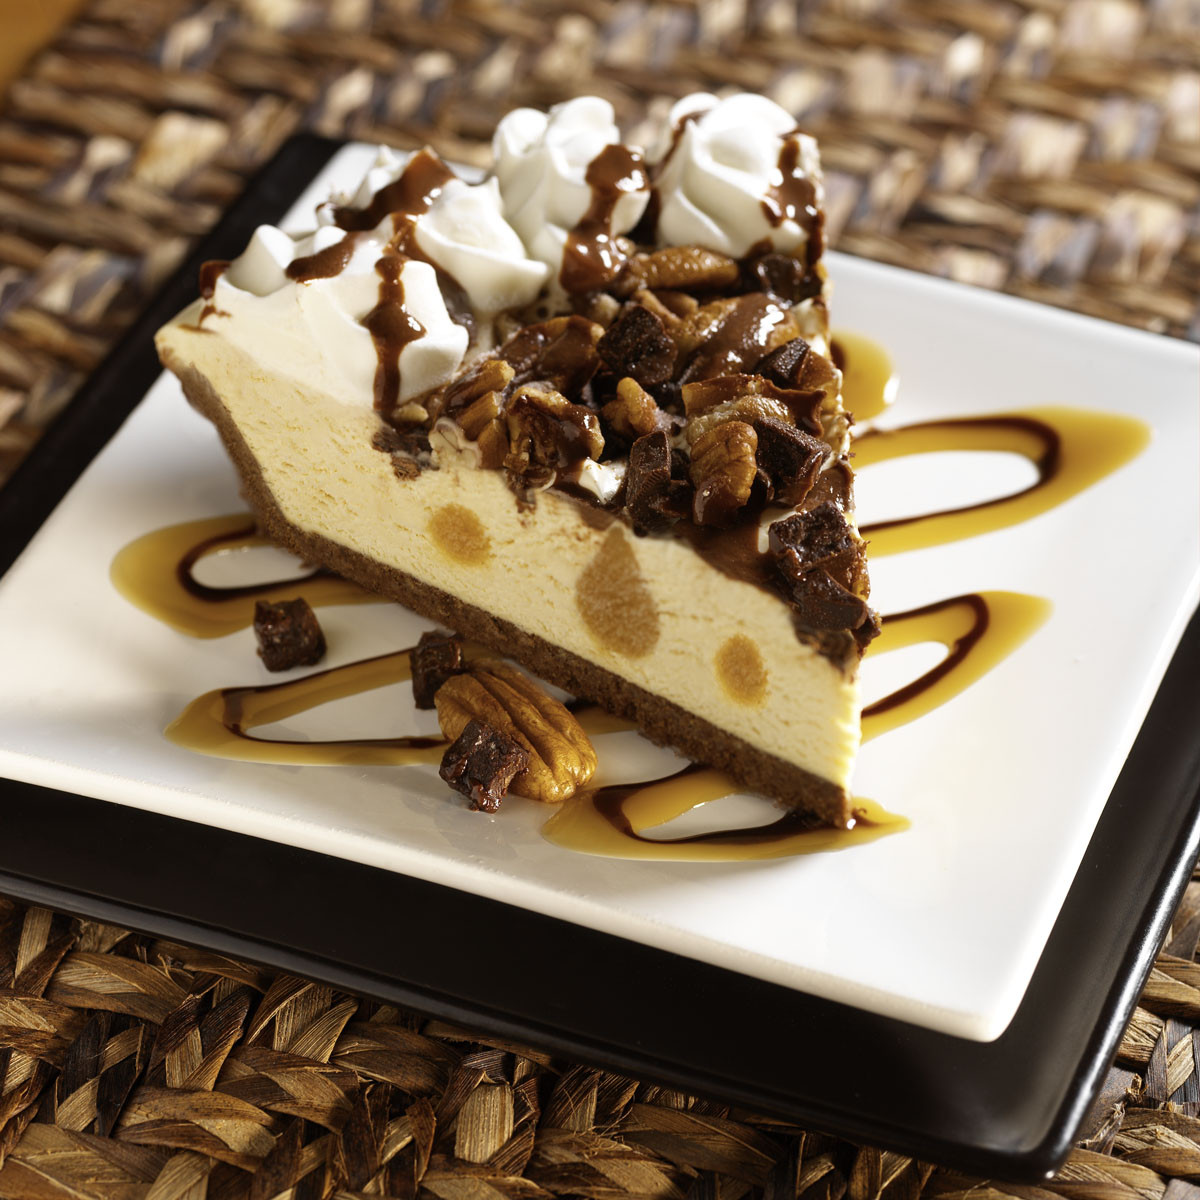 Gourmet Dessert Recipes
 Edwards New Desserts Win Blue Ribbons at National Pie